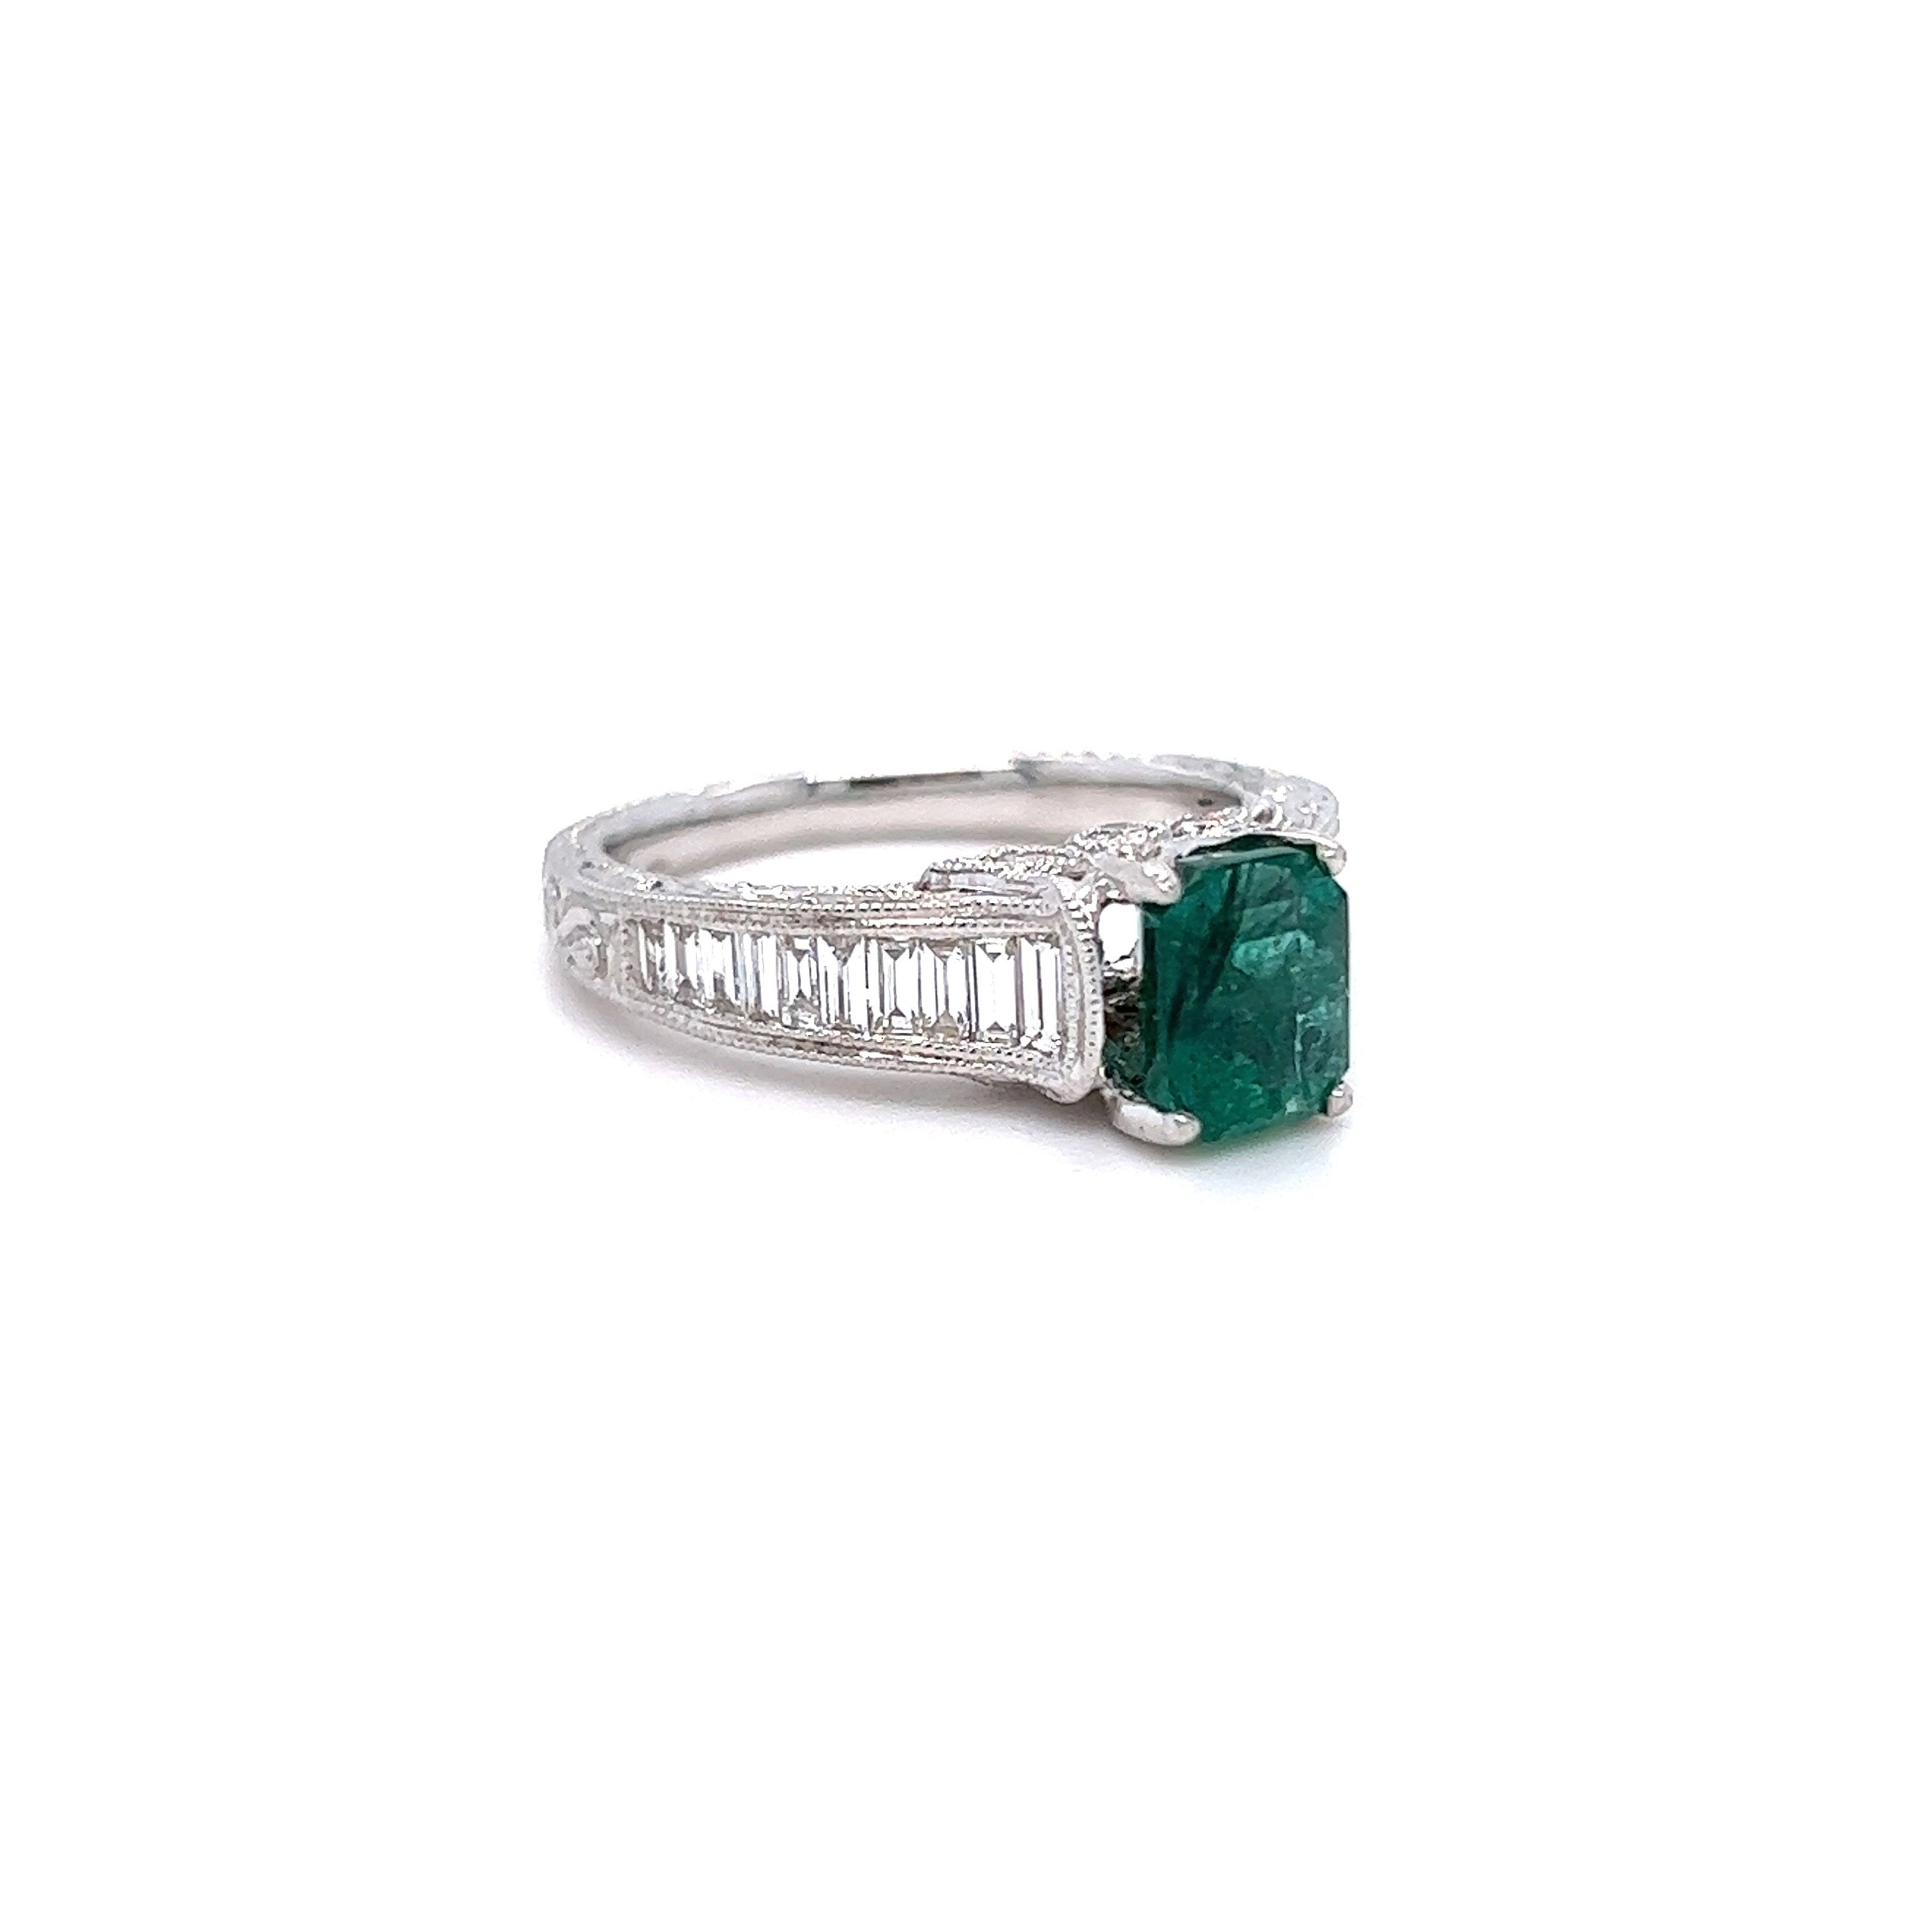 Beautiful Vintage 18K White Gold Diamond and Emerald Ring with Baguettes- 2.15ct.